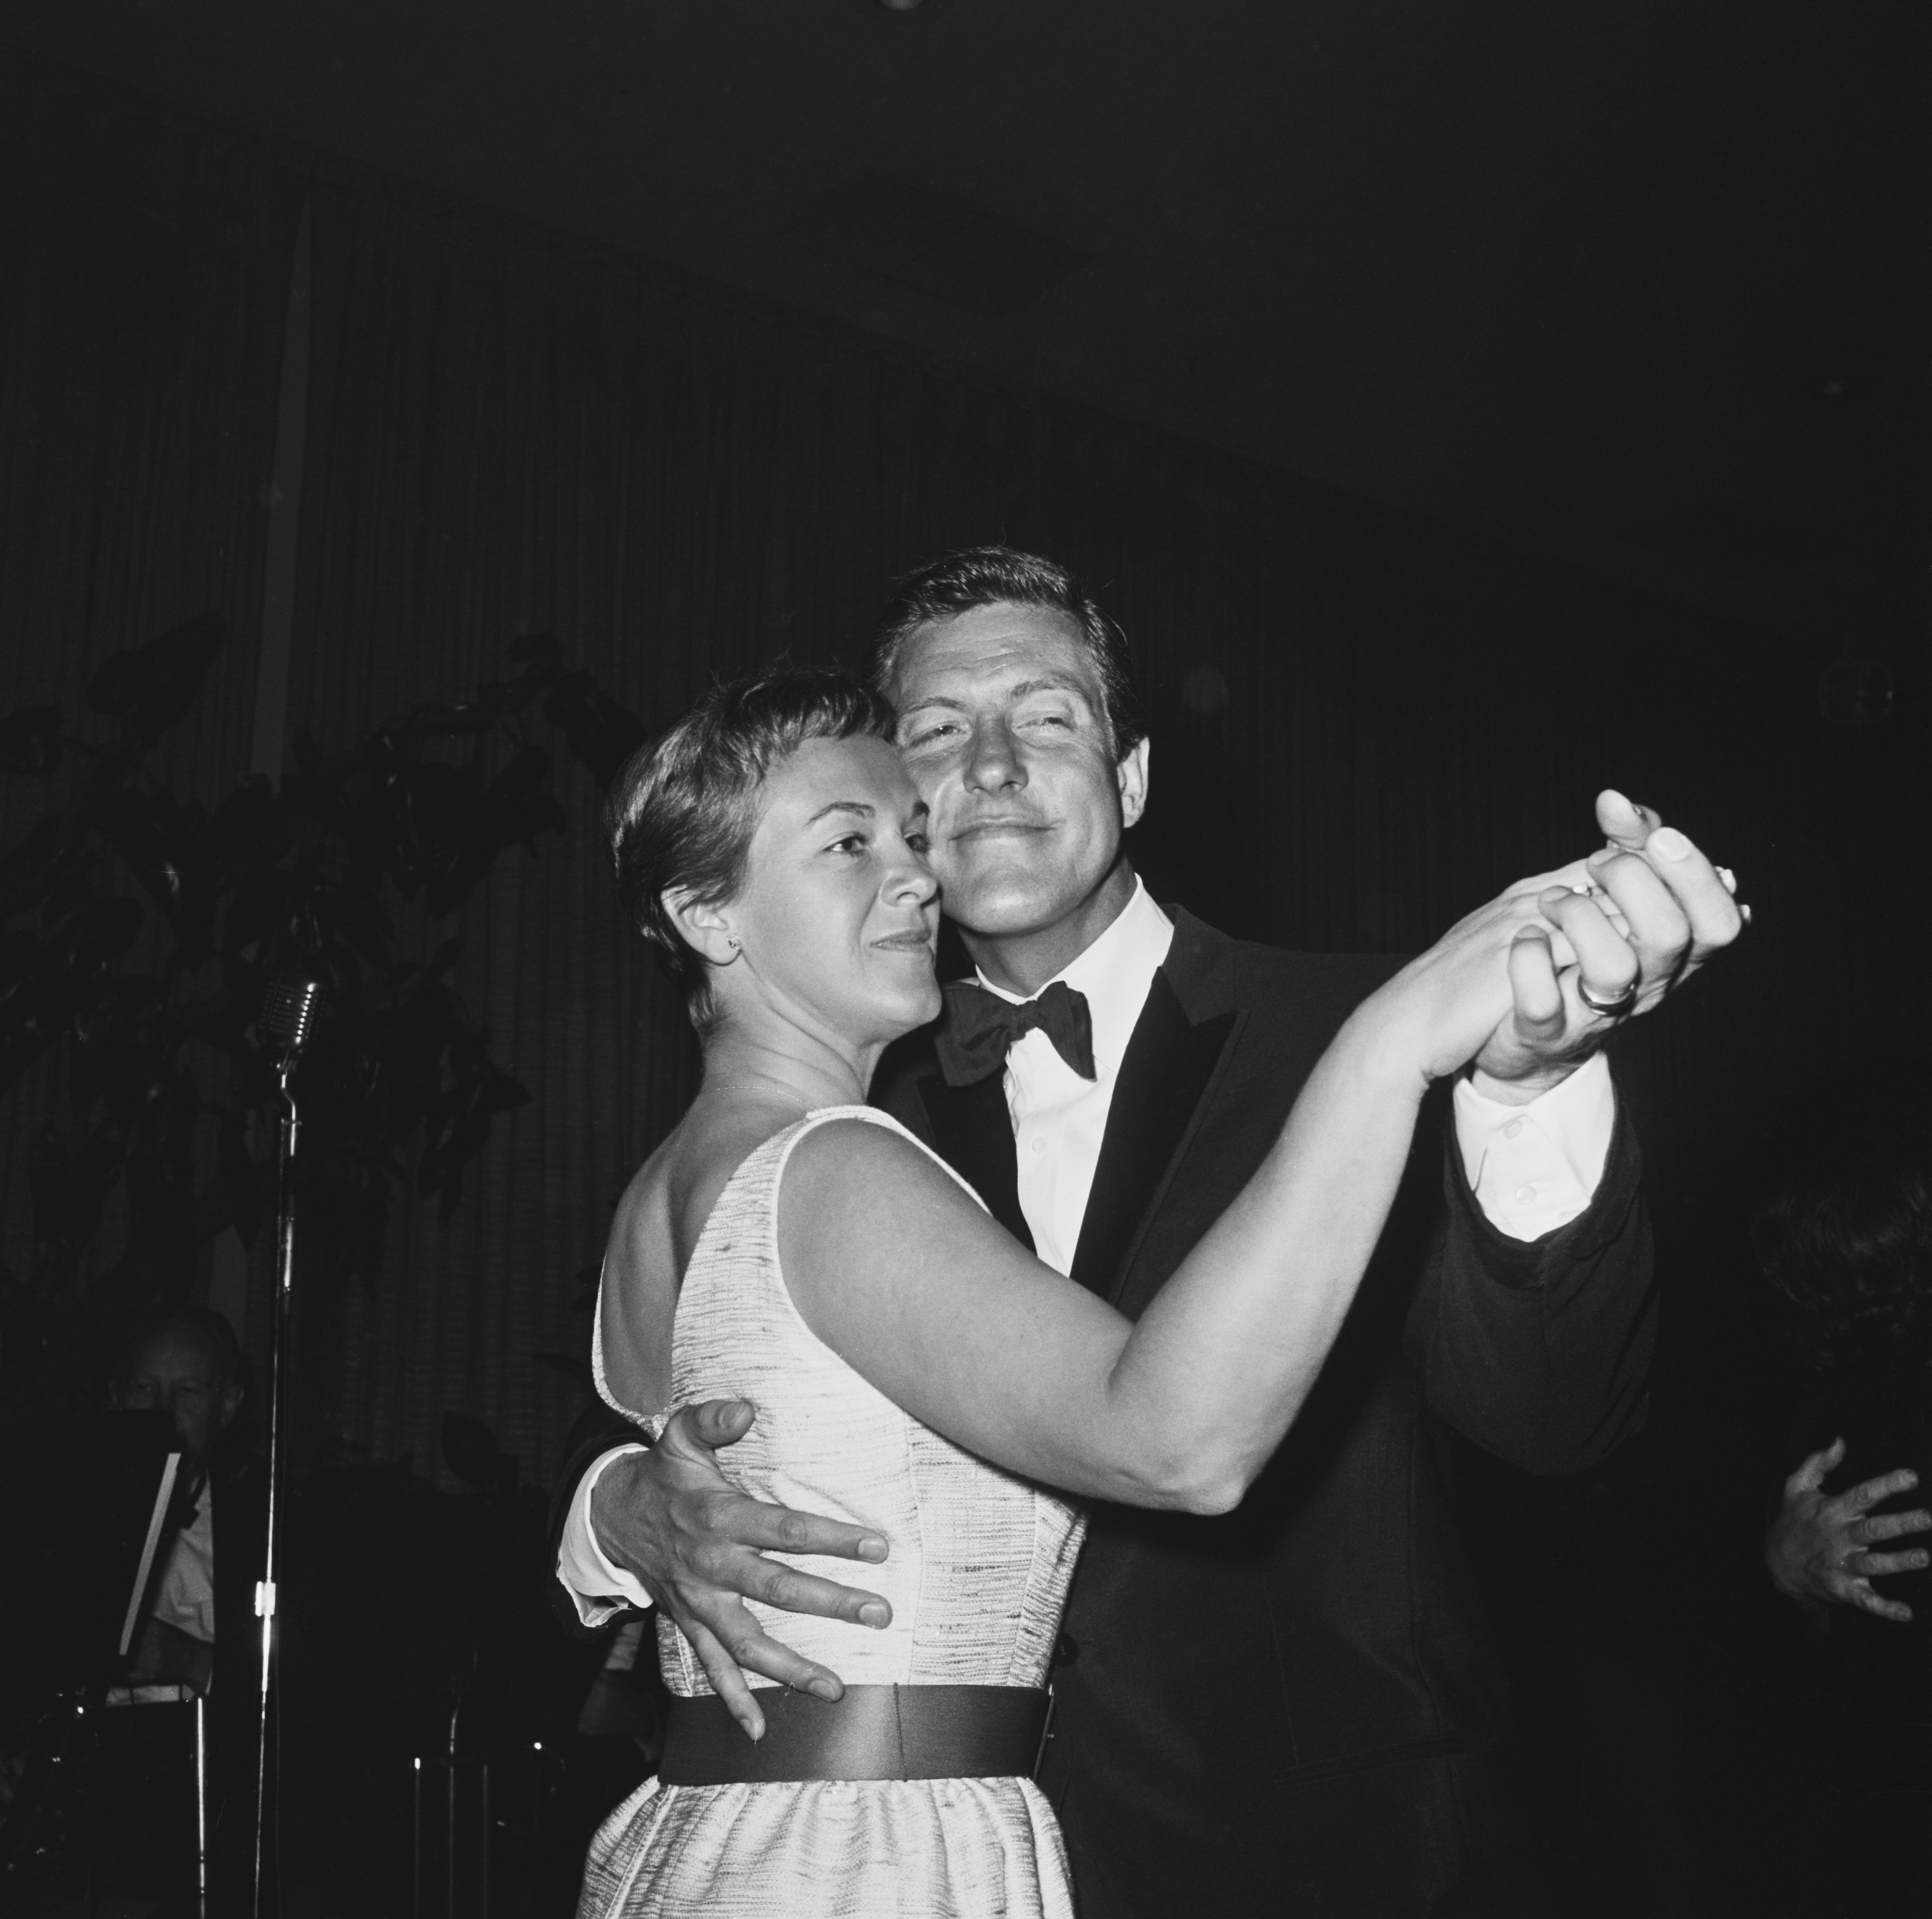 Dick Van Dyke dancing with Margie Willett at a Screen Producers' Guild party, USA, in 1964. | Source Getty Images